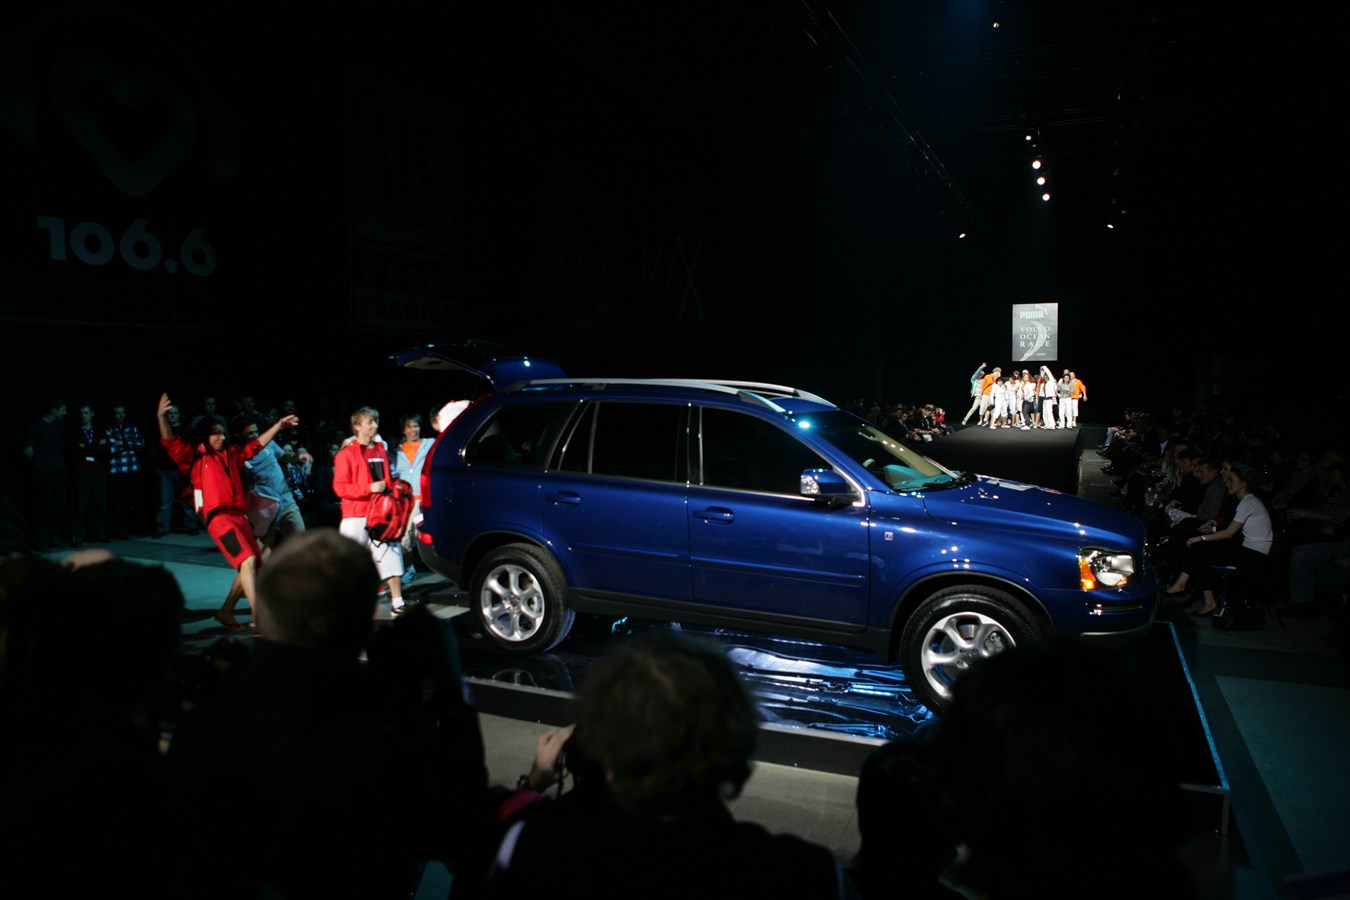 On the premiere evening of the the Moscow spring fashion week 2008, the XC90 Ocean Race Edition was unveiled for the first time in Russia – at the same time as Valentine Yudashkin’s new collection captivated onlookers on the catwalk.